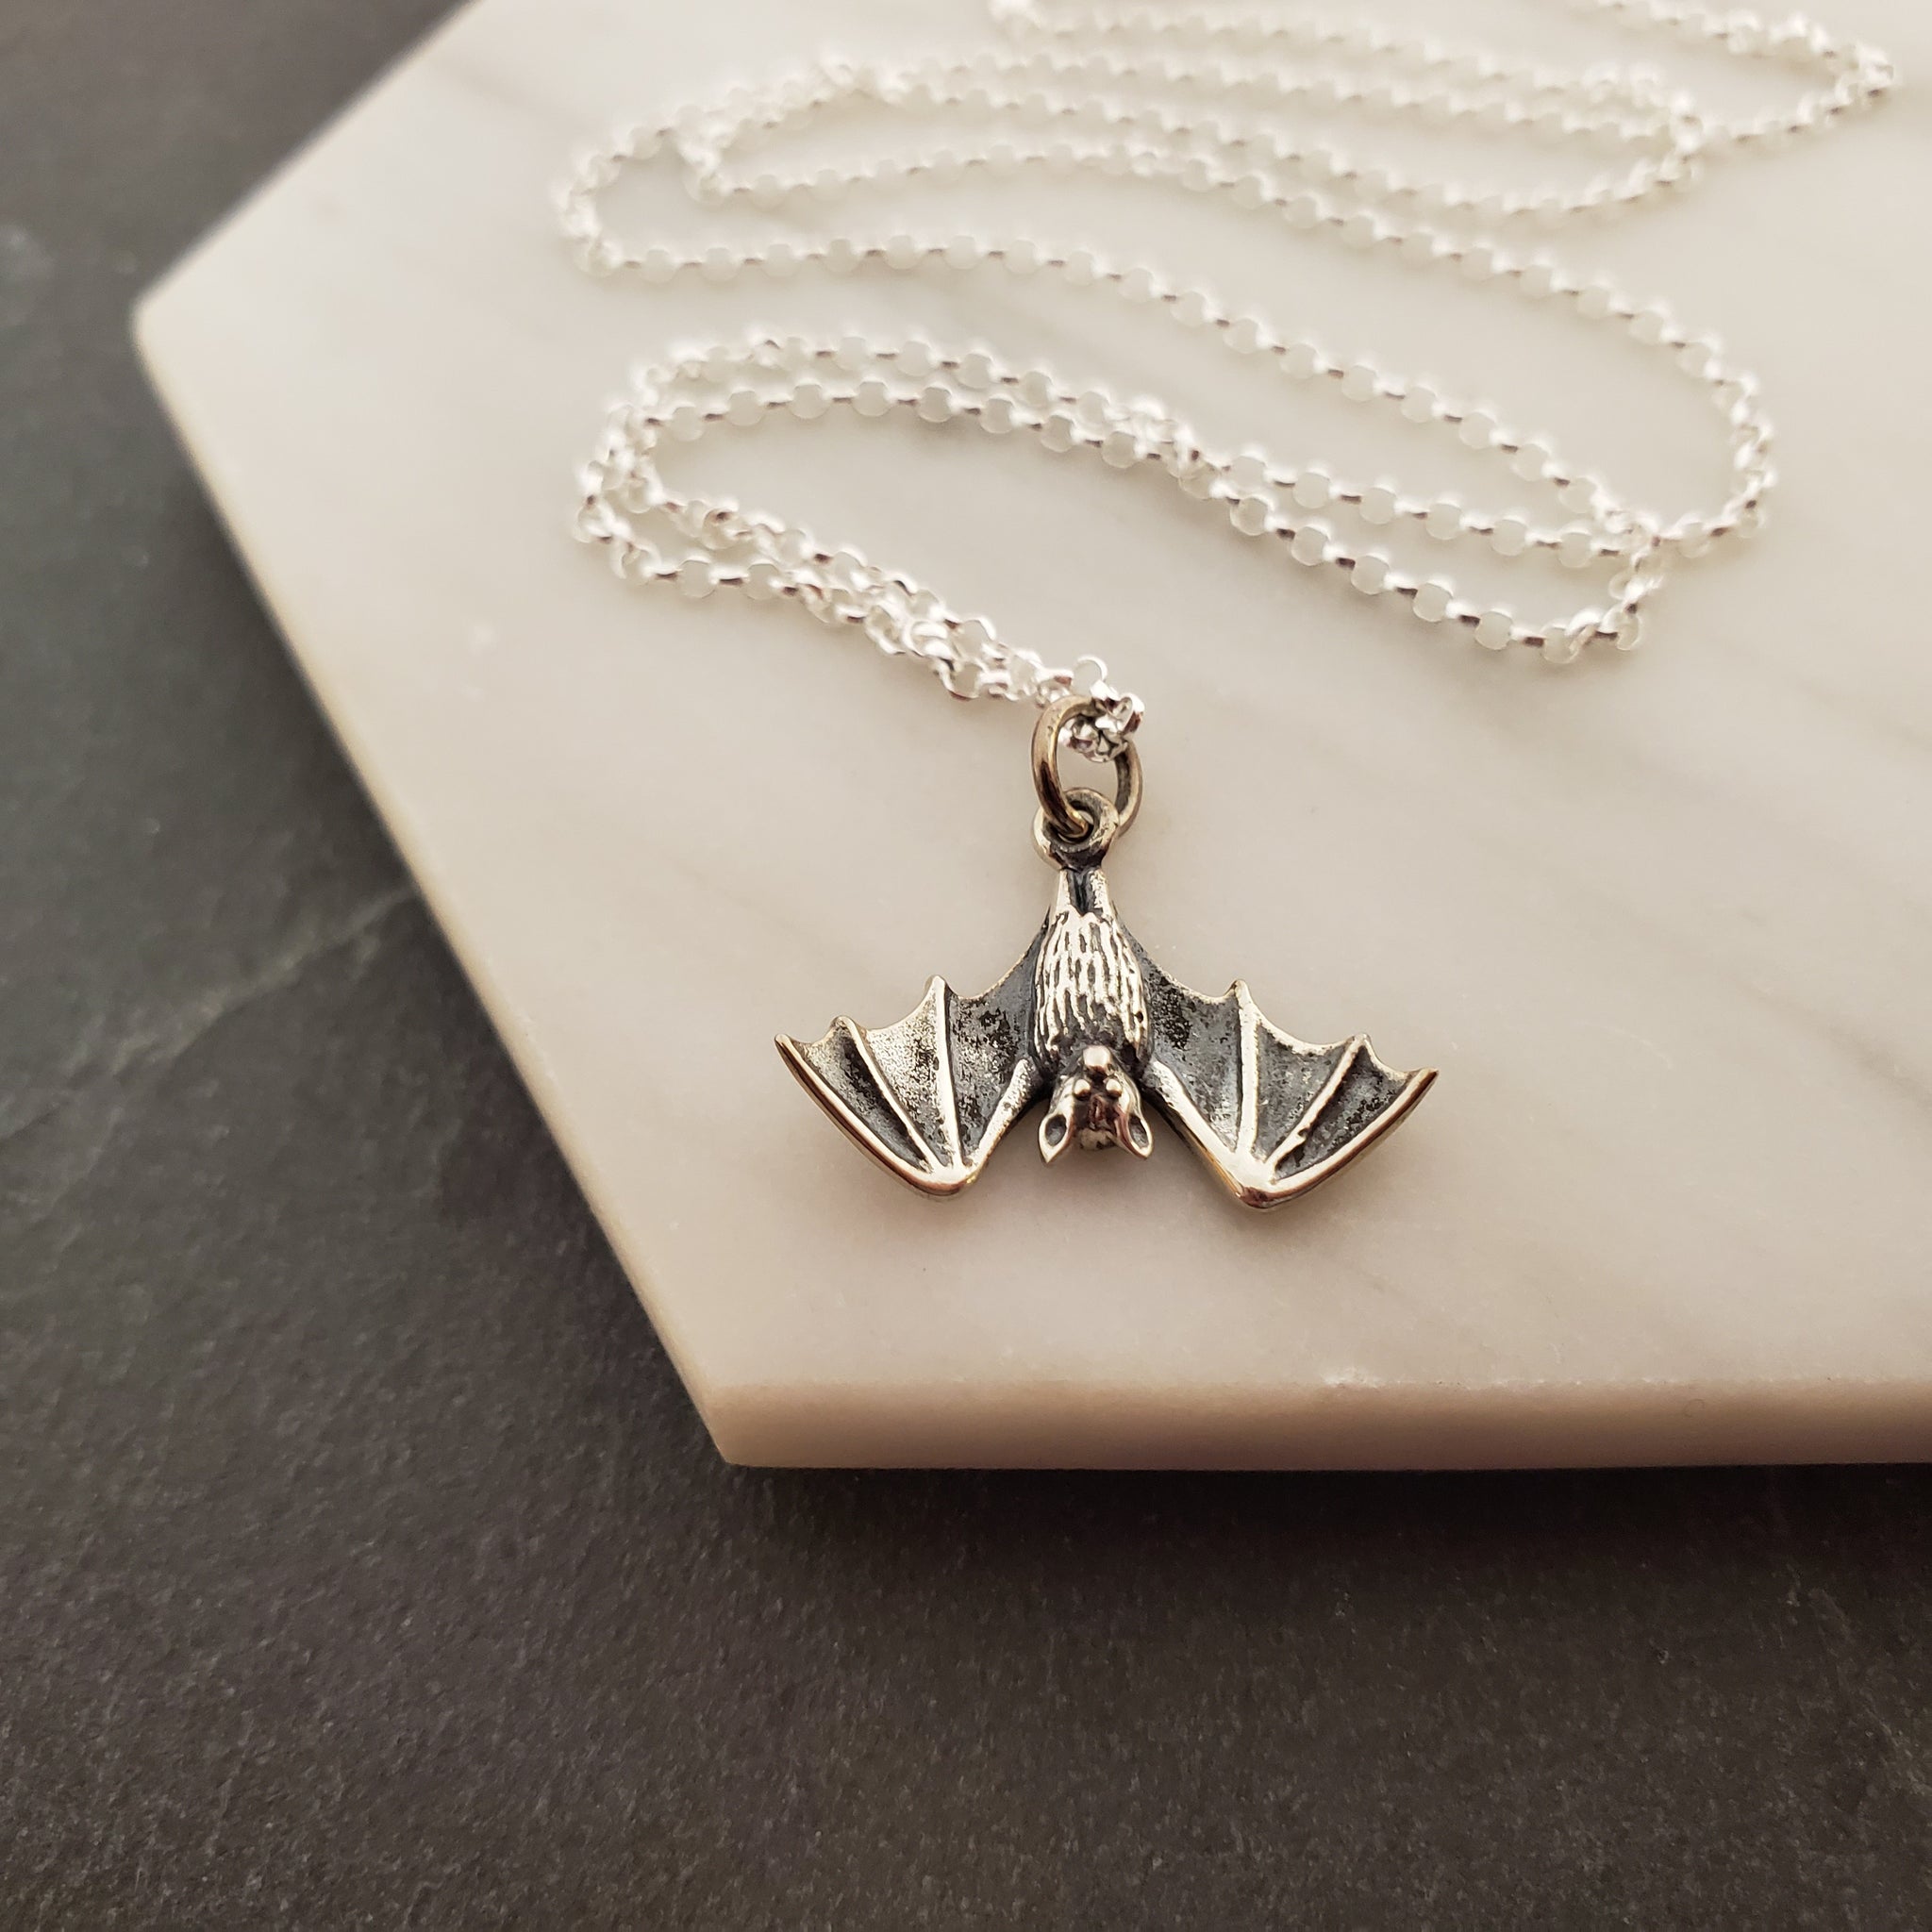 Buy Small Bat Necklace Online in India - Etsy